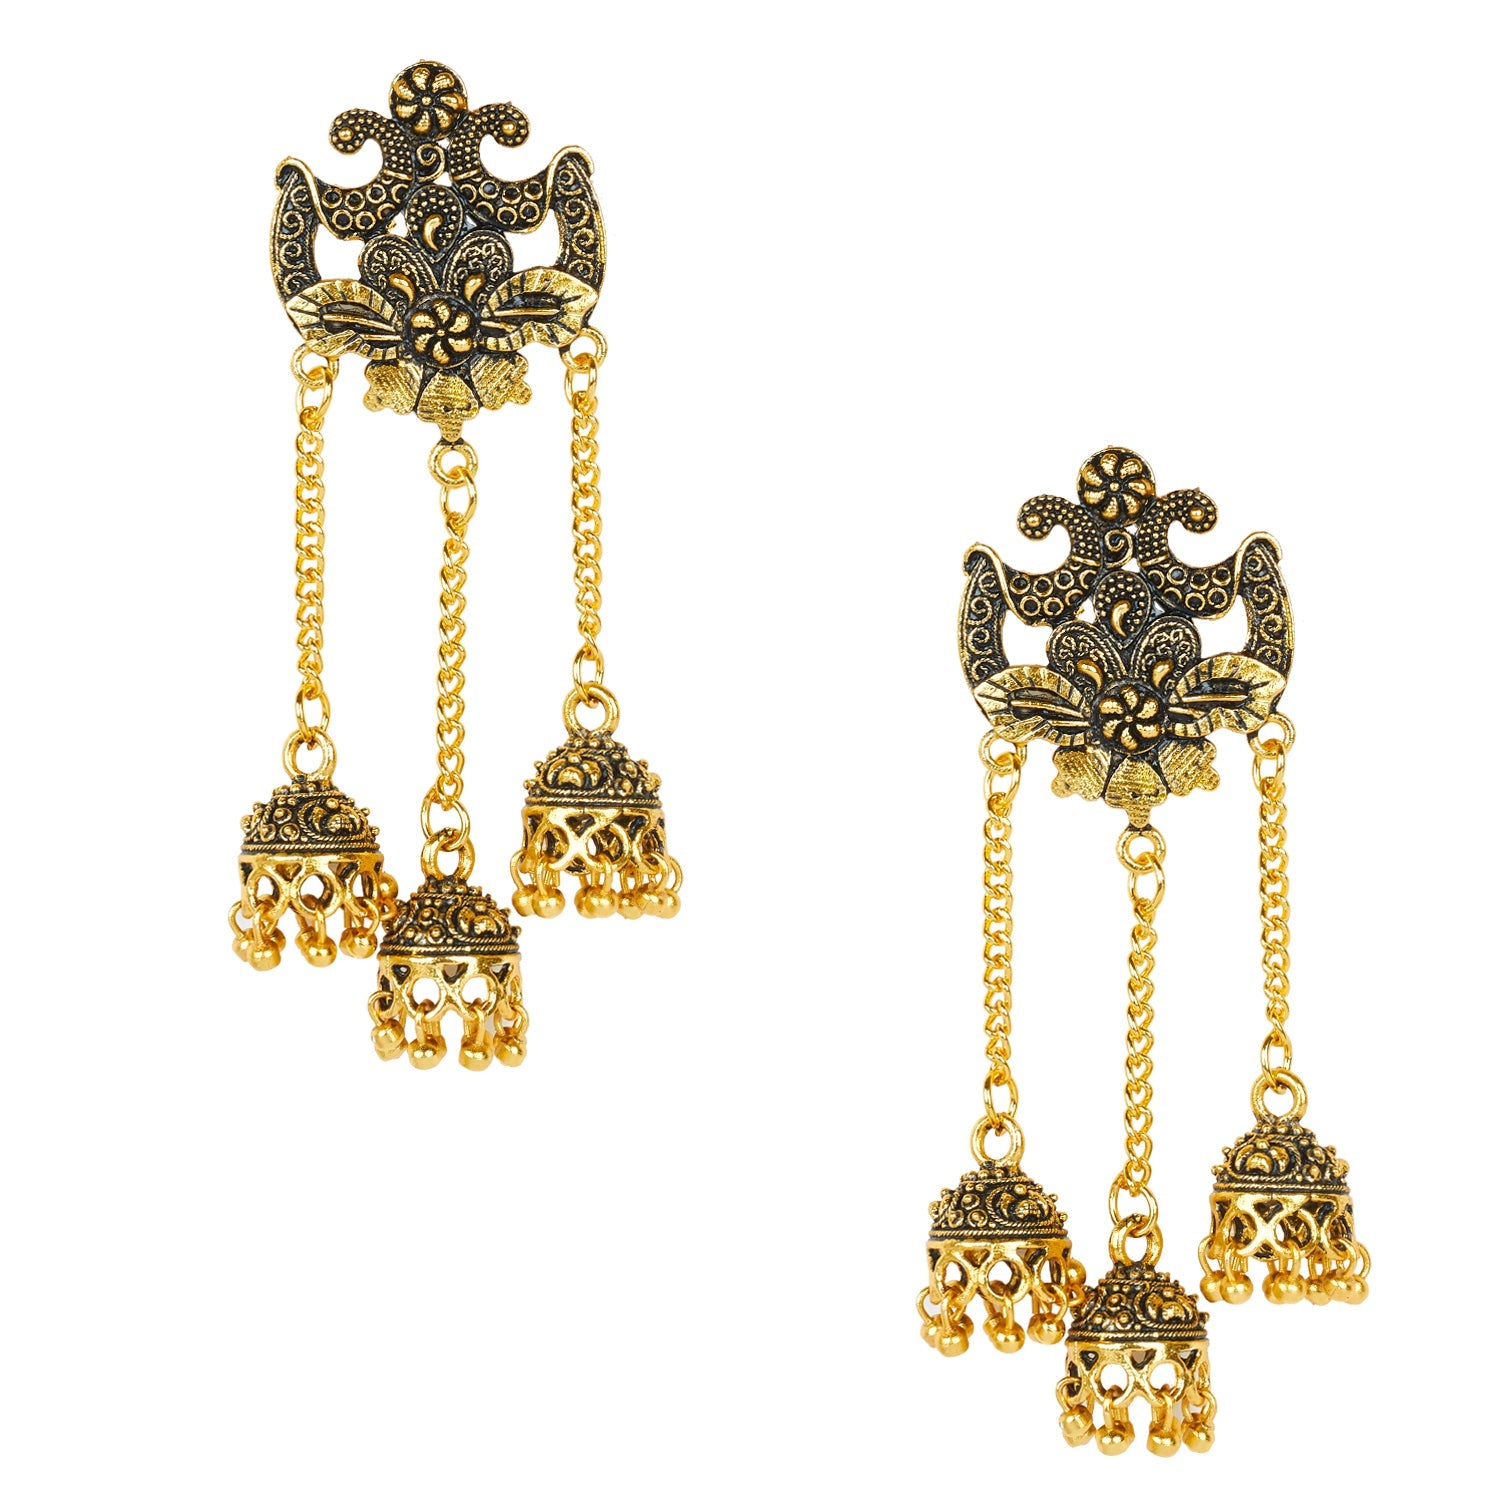 Gagini Antique Jhumka Earrings | Gold fashion necklace, Gold bride jewelry, Jhumka  earrings